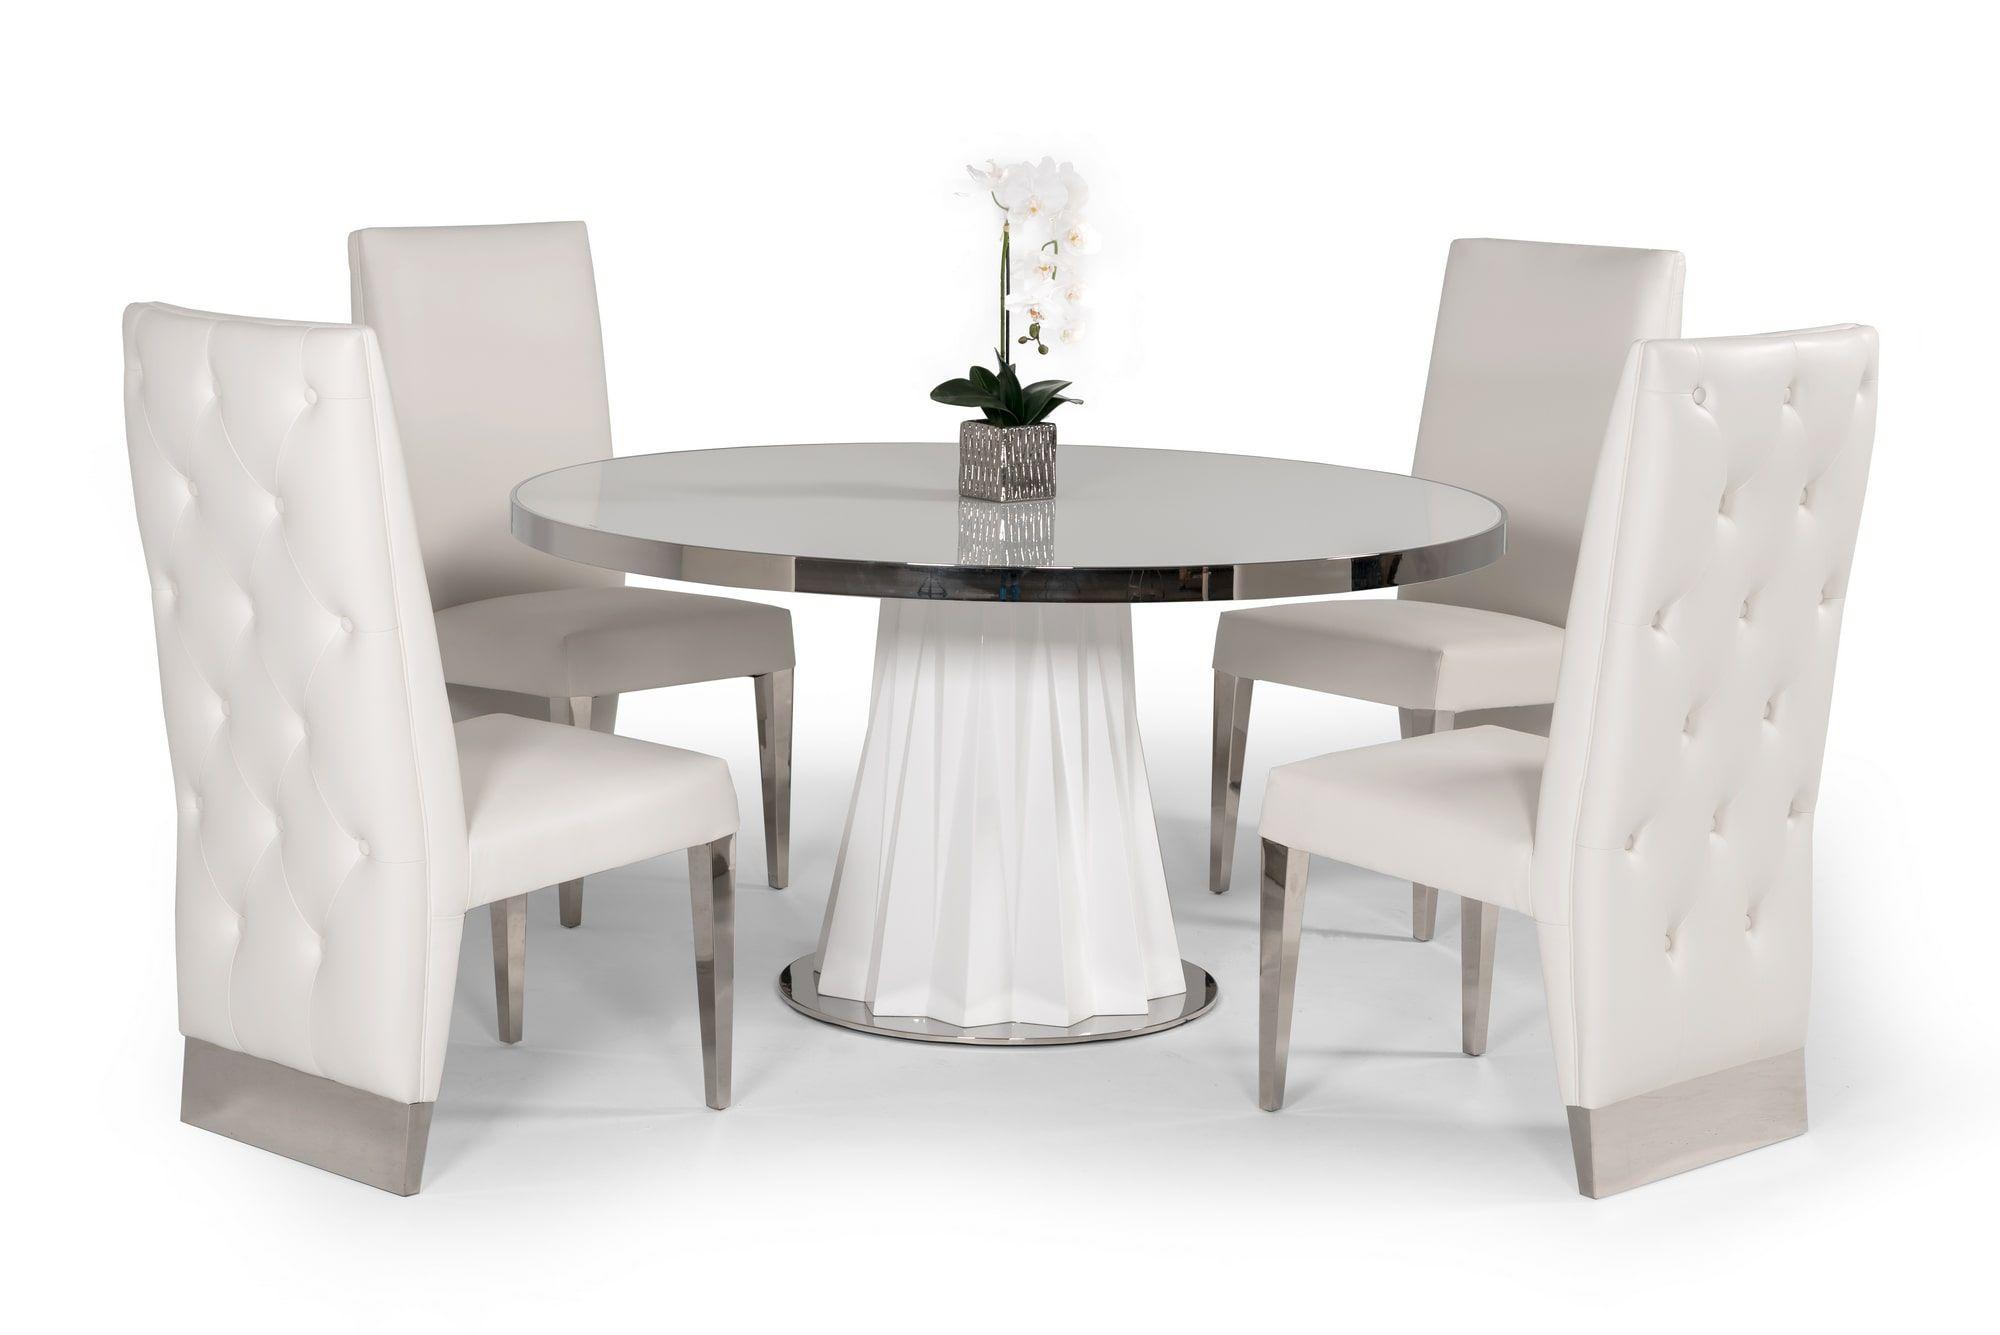 Contemporary, Modern Dining Room Set Cabaret Kilson VGVCT1799-5pcs in White Leatherette